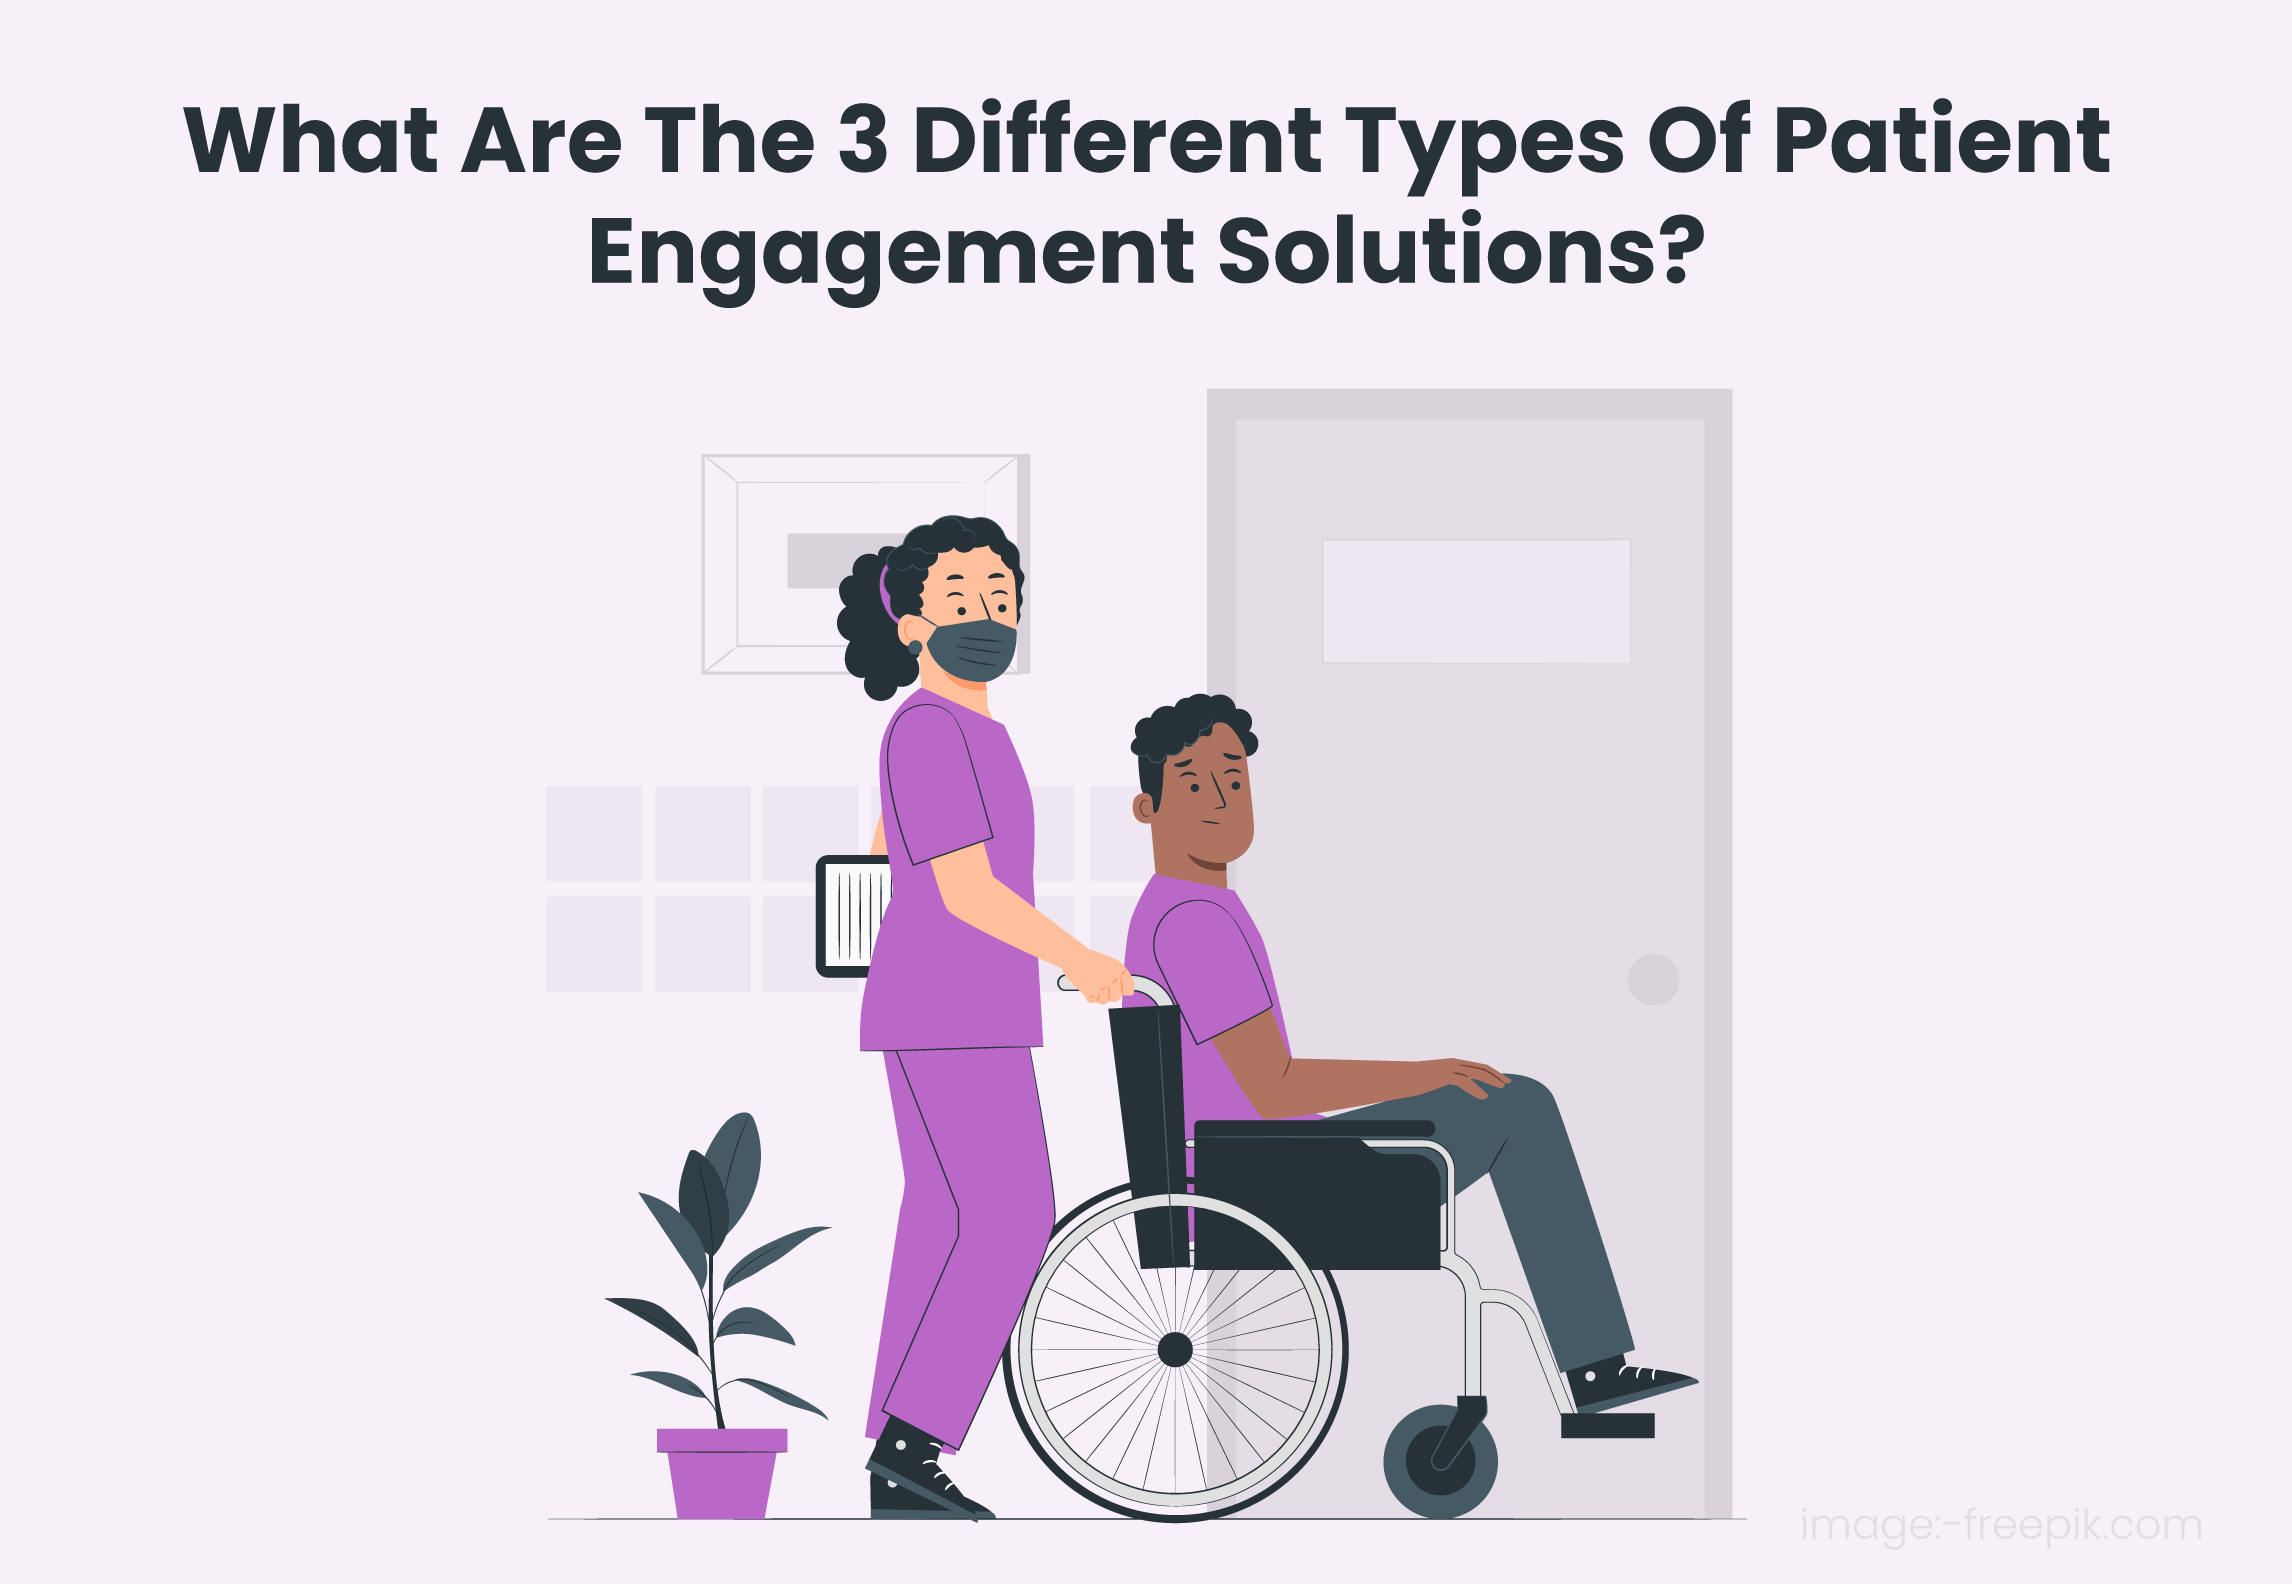 What Are The 3 Different Types Of Patient Engagement Solutions?